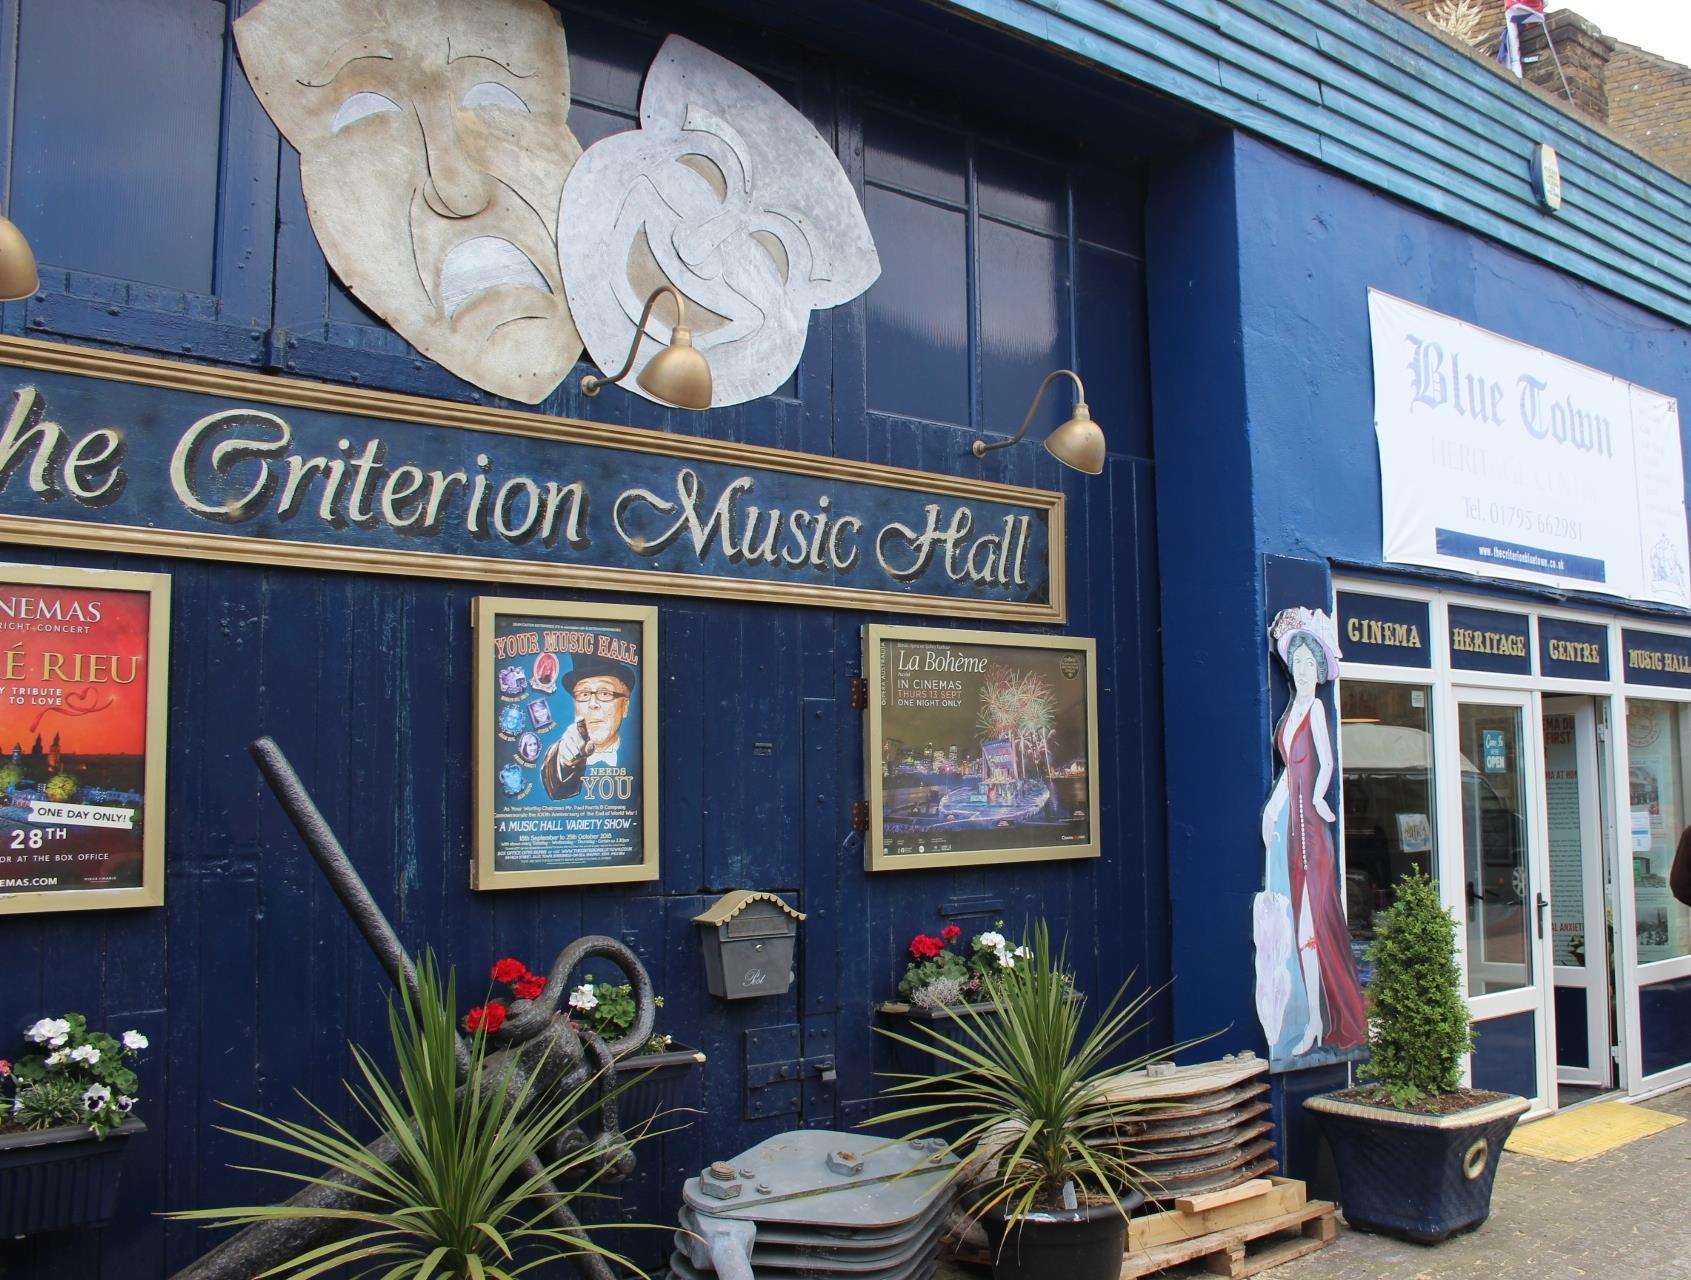 The Criterion Theatre and Blue Town Heritage Centre on the Isle of Sheppey (3195156)